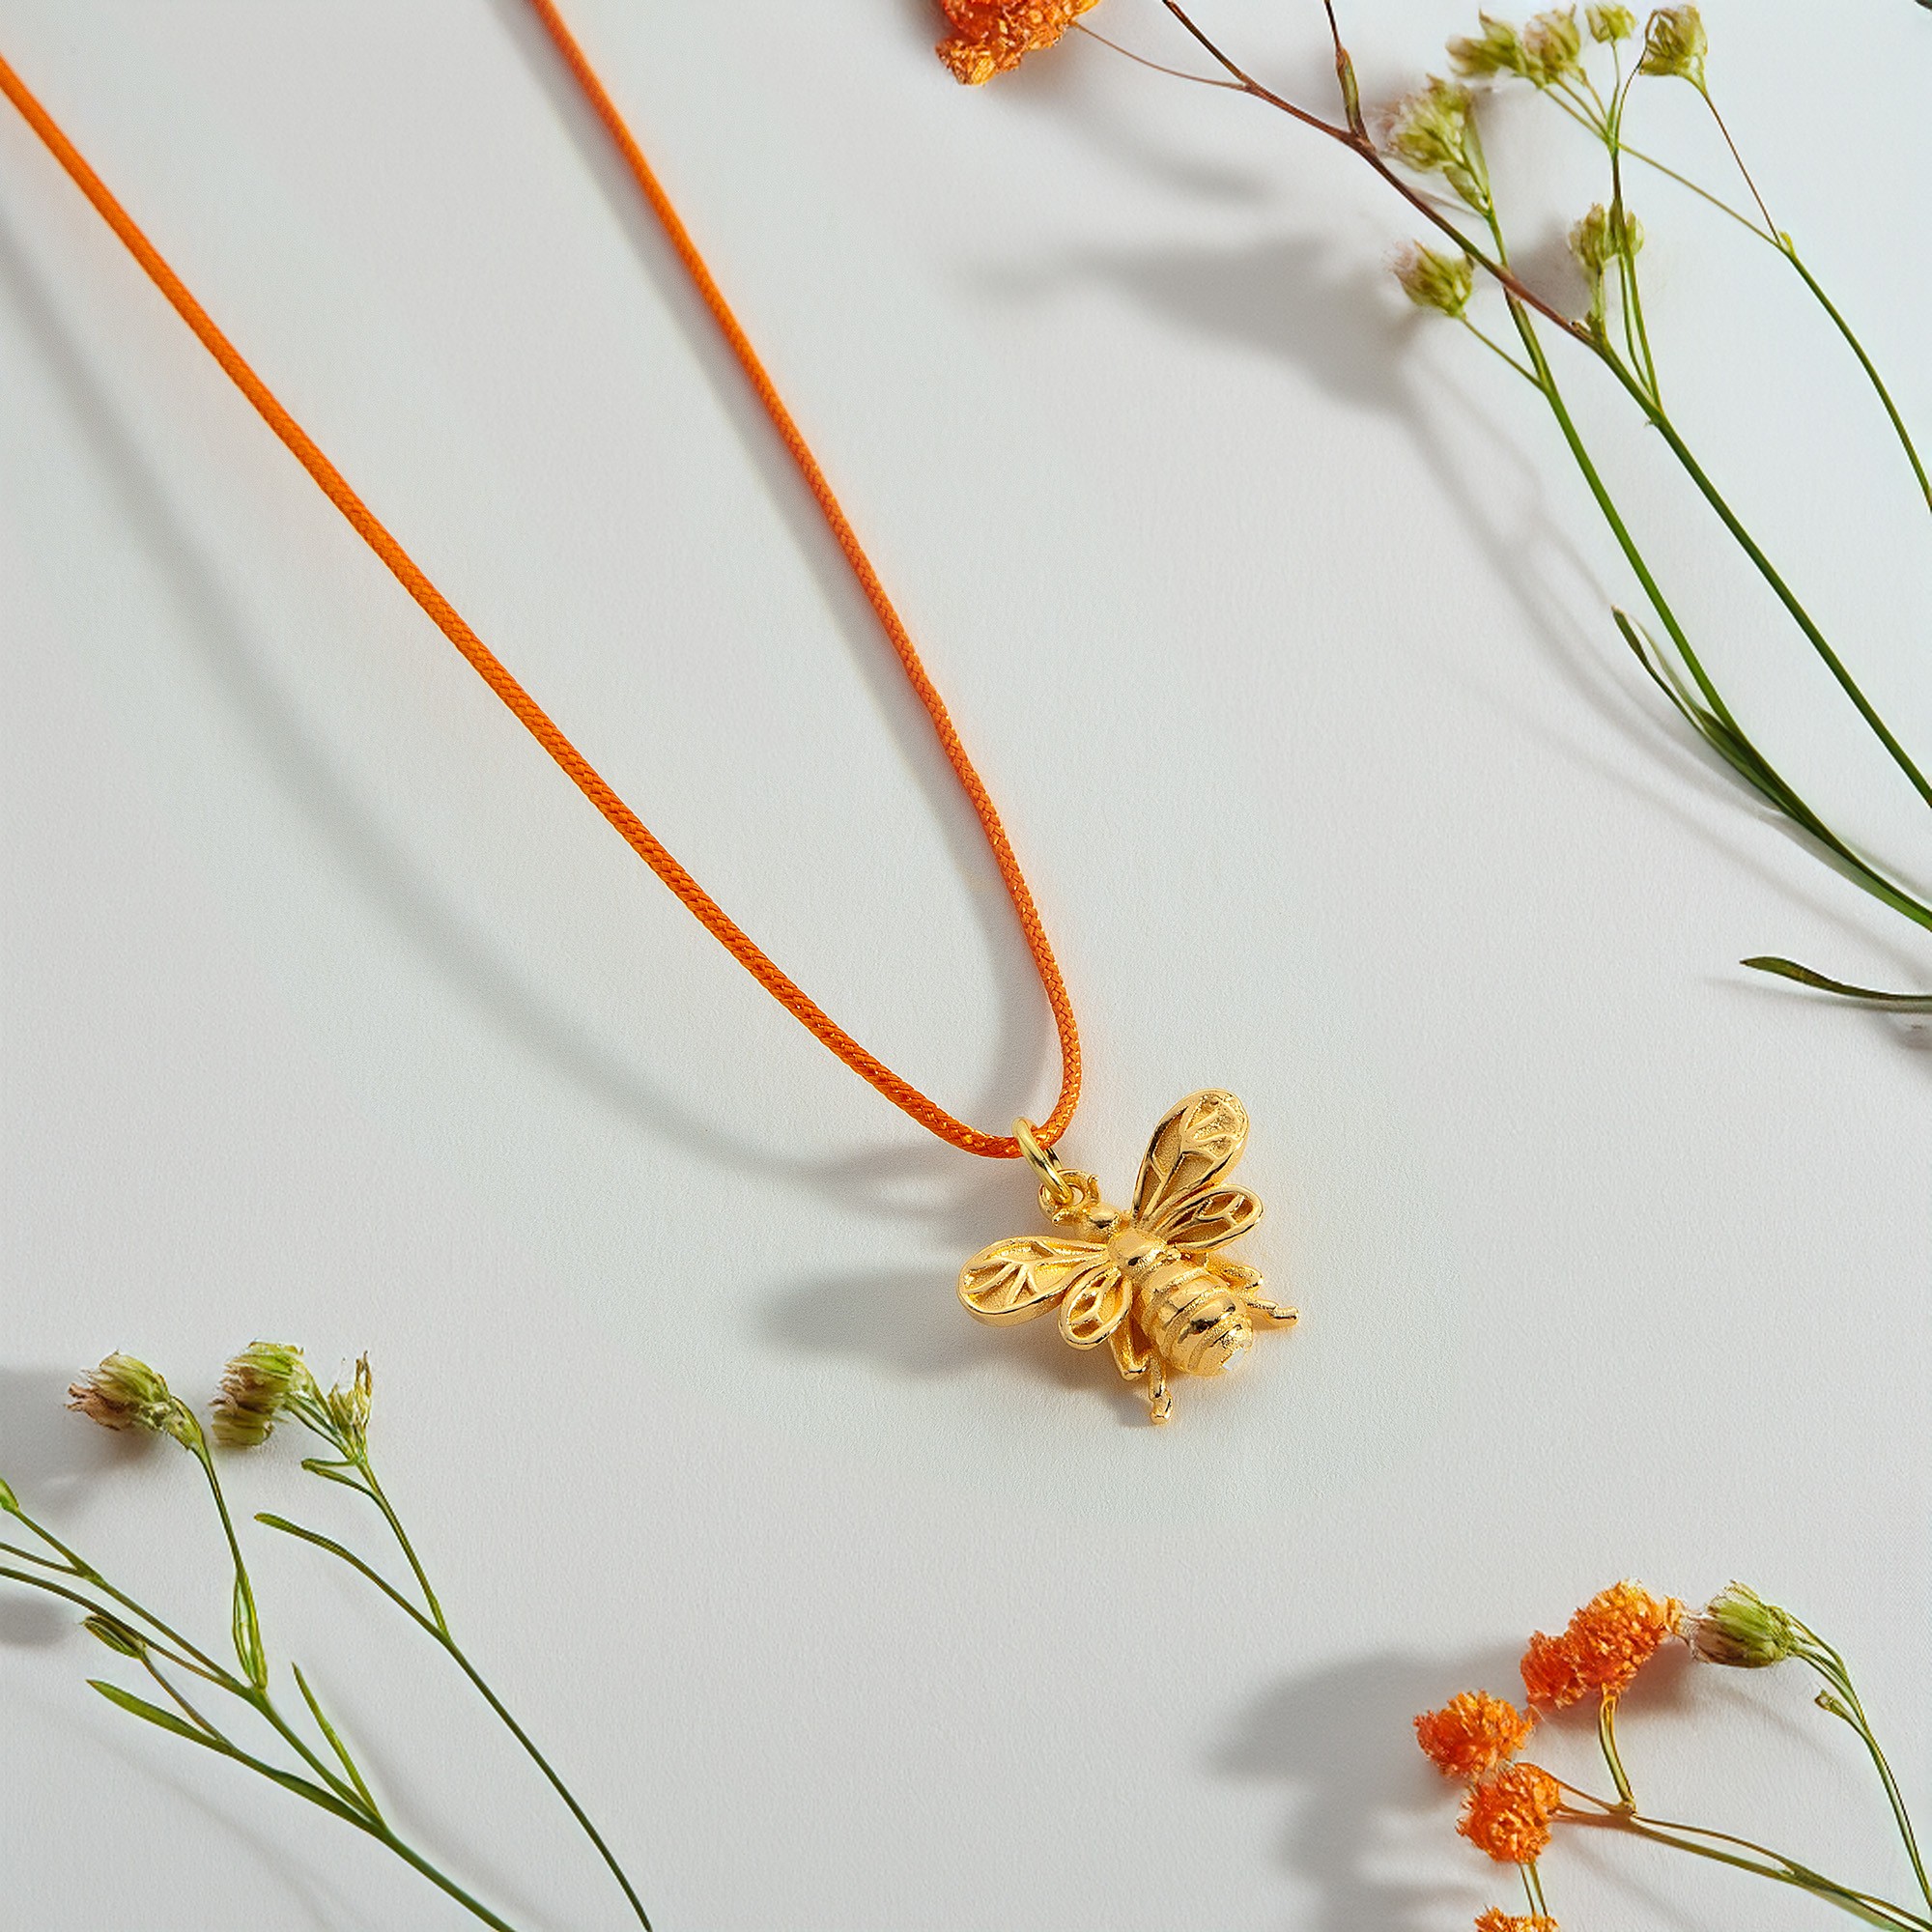 The Bee String Pendant